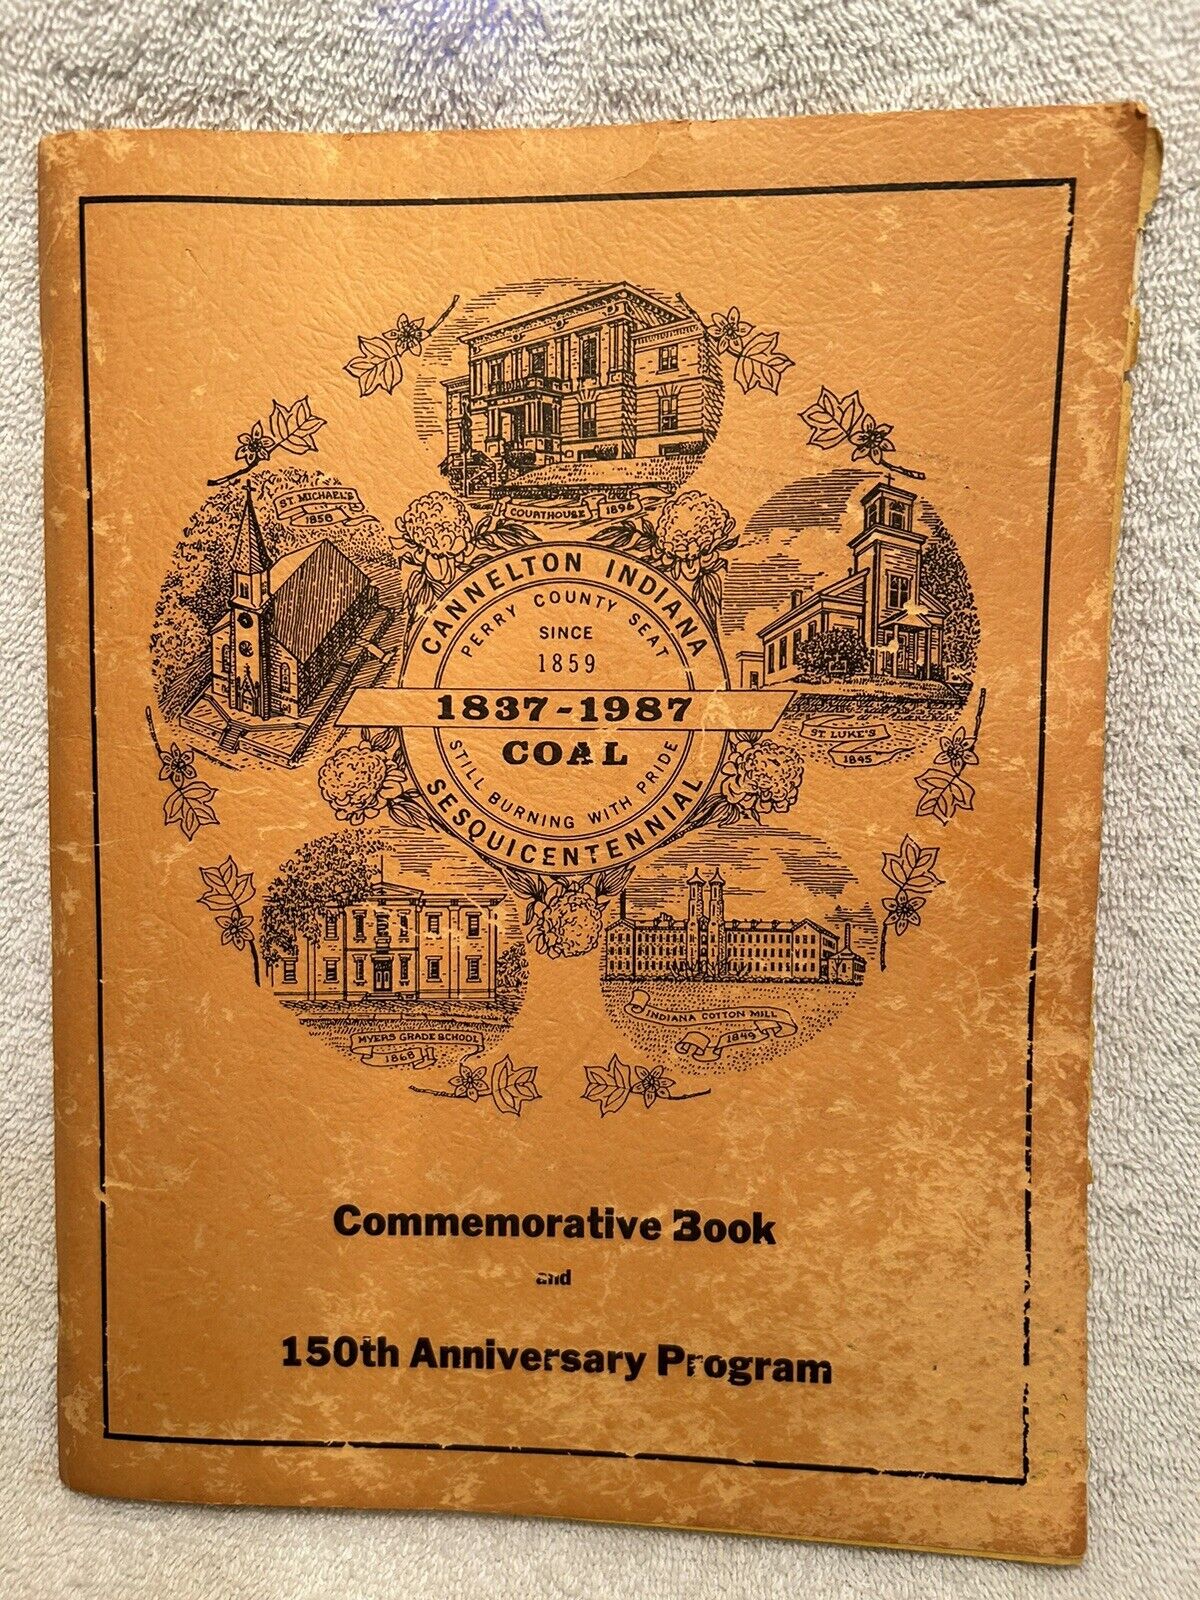 1987 Commemorative Book Celebrates Cannelton IN Sesquicentennial Great Photos